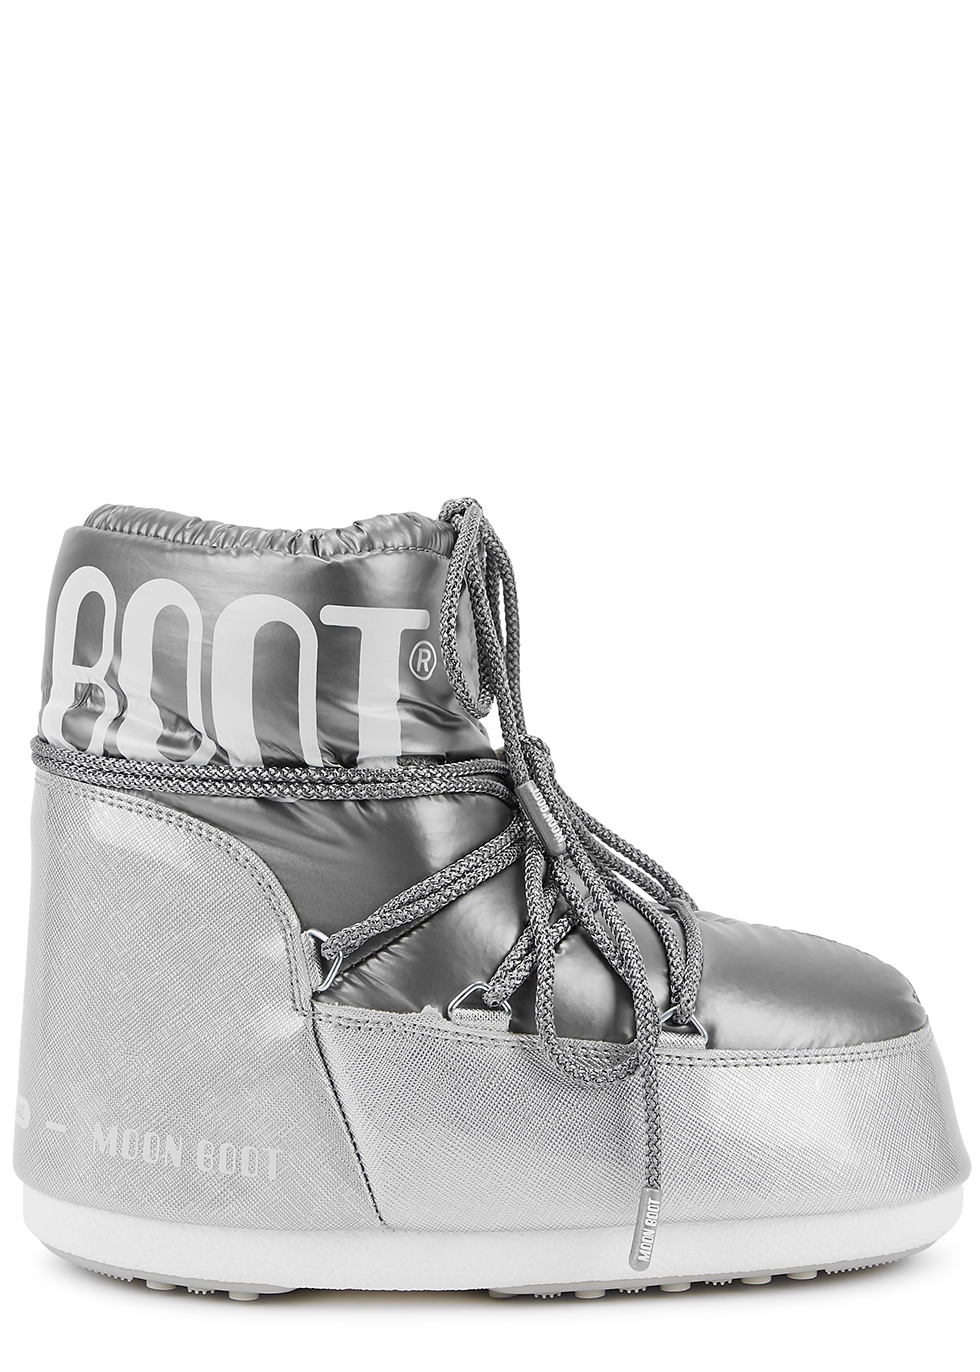 Icon Pillow silver padded nylon snow boots Harvey Nichols Women Shoes Boots Snow Boots 